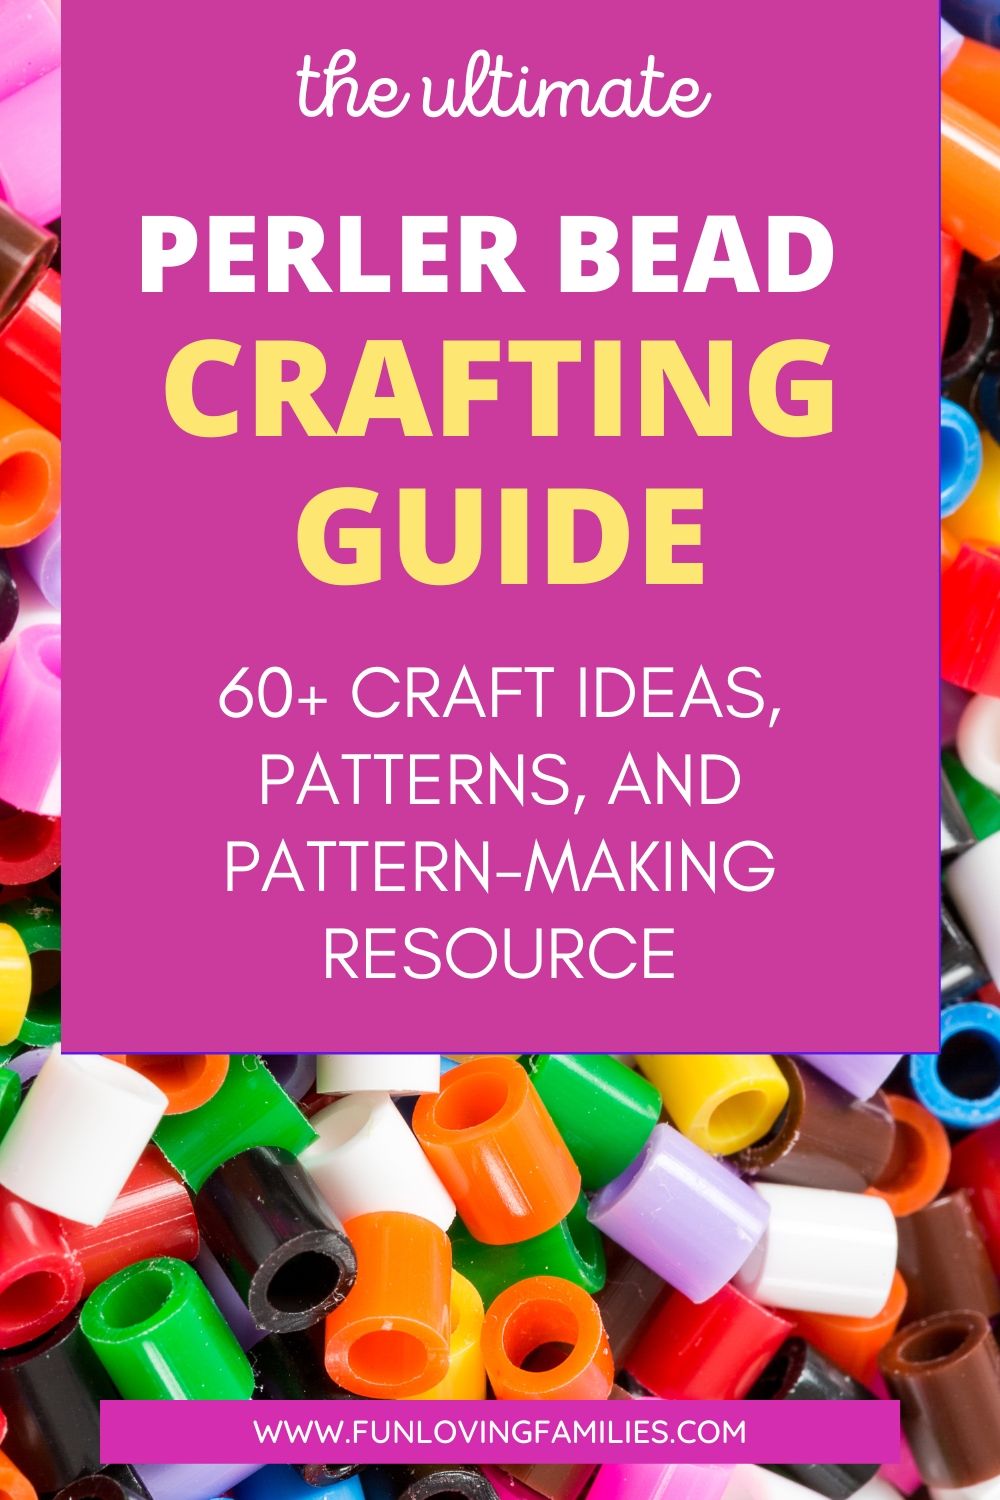 Perler Bead patterns and crafts guide and resource